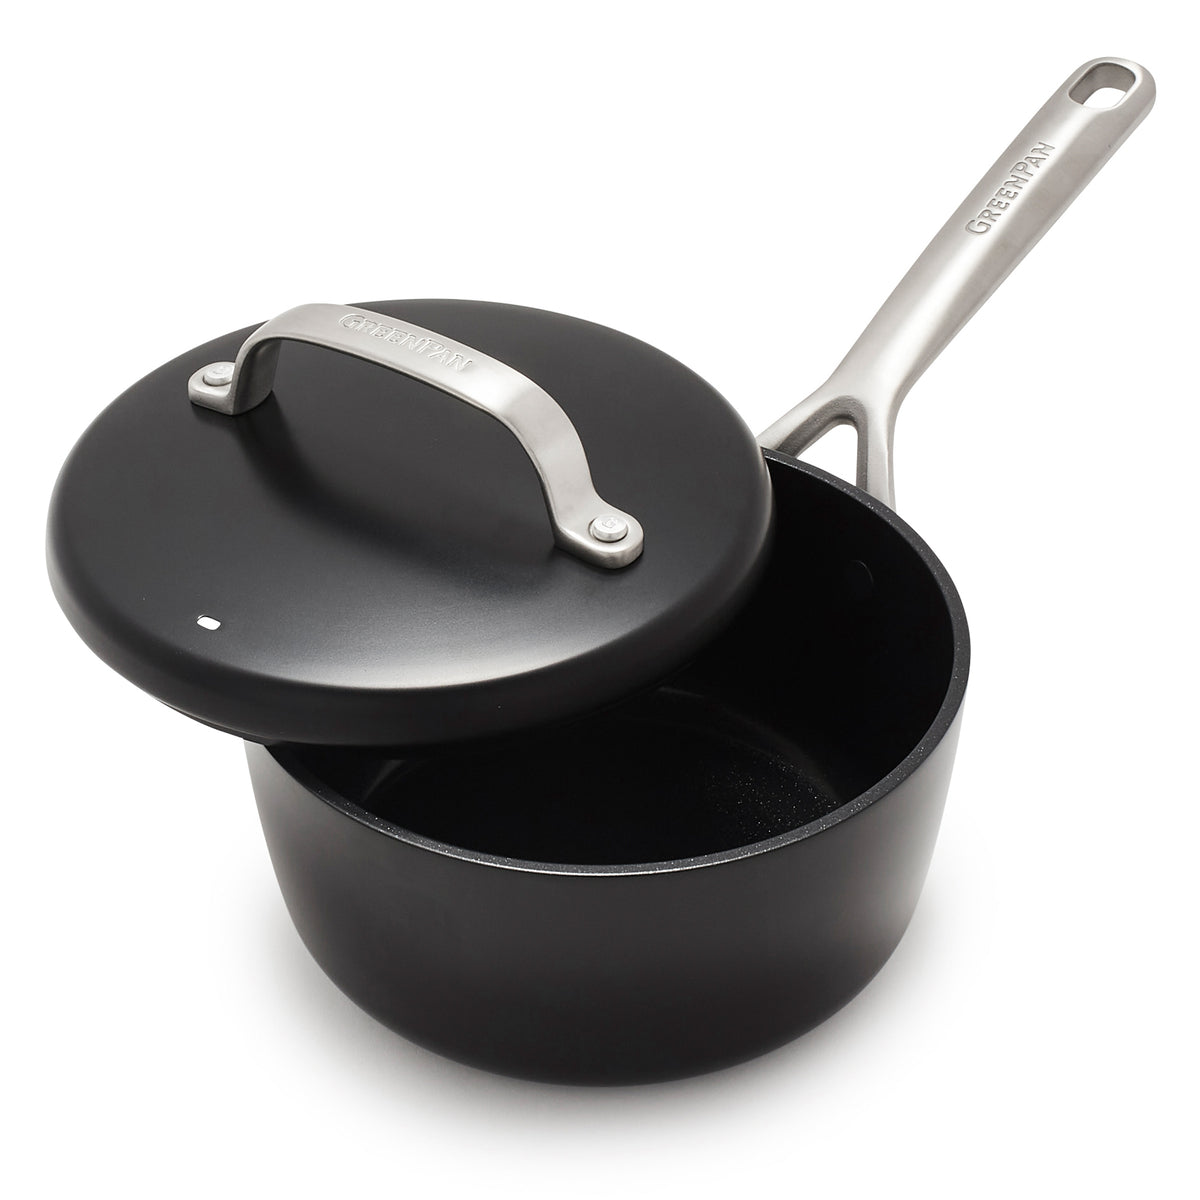 Sauce Pan Sizes: Know Before You Buy